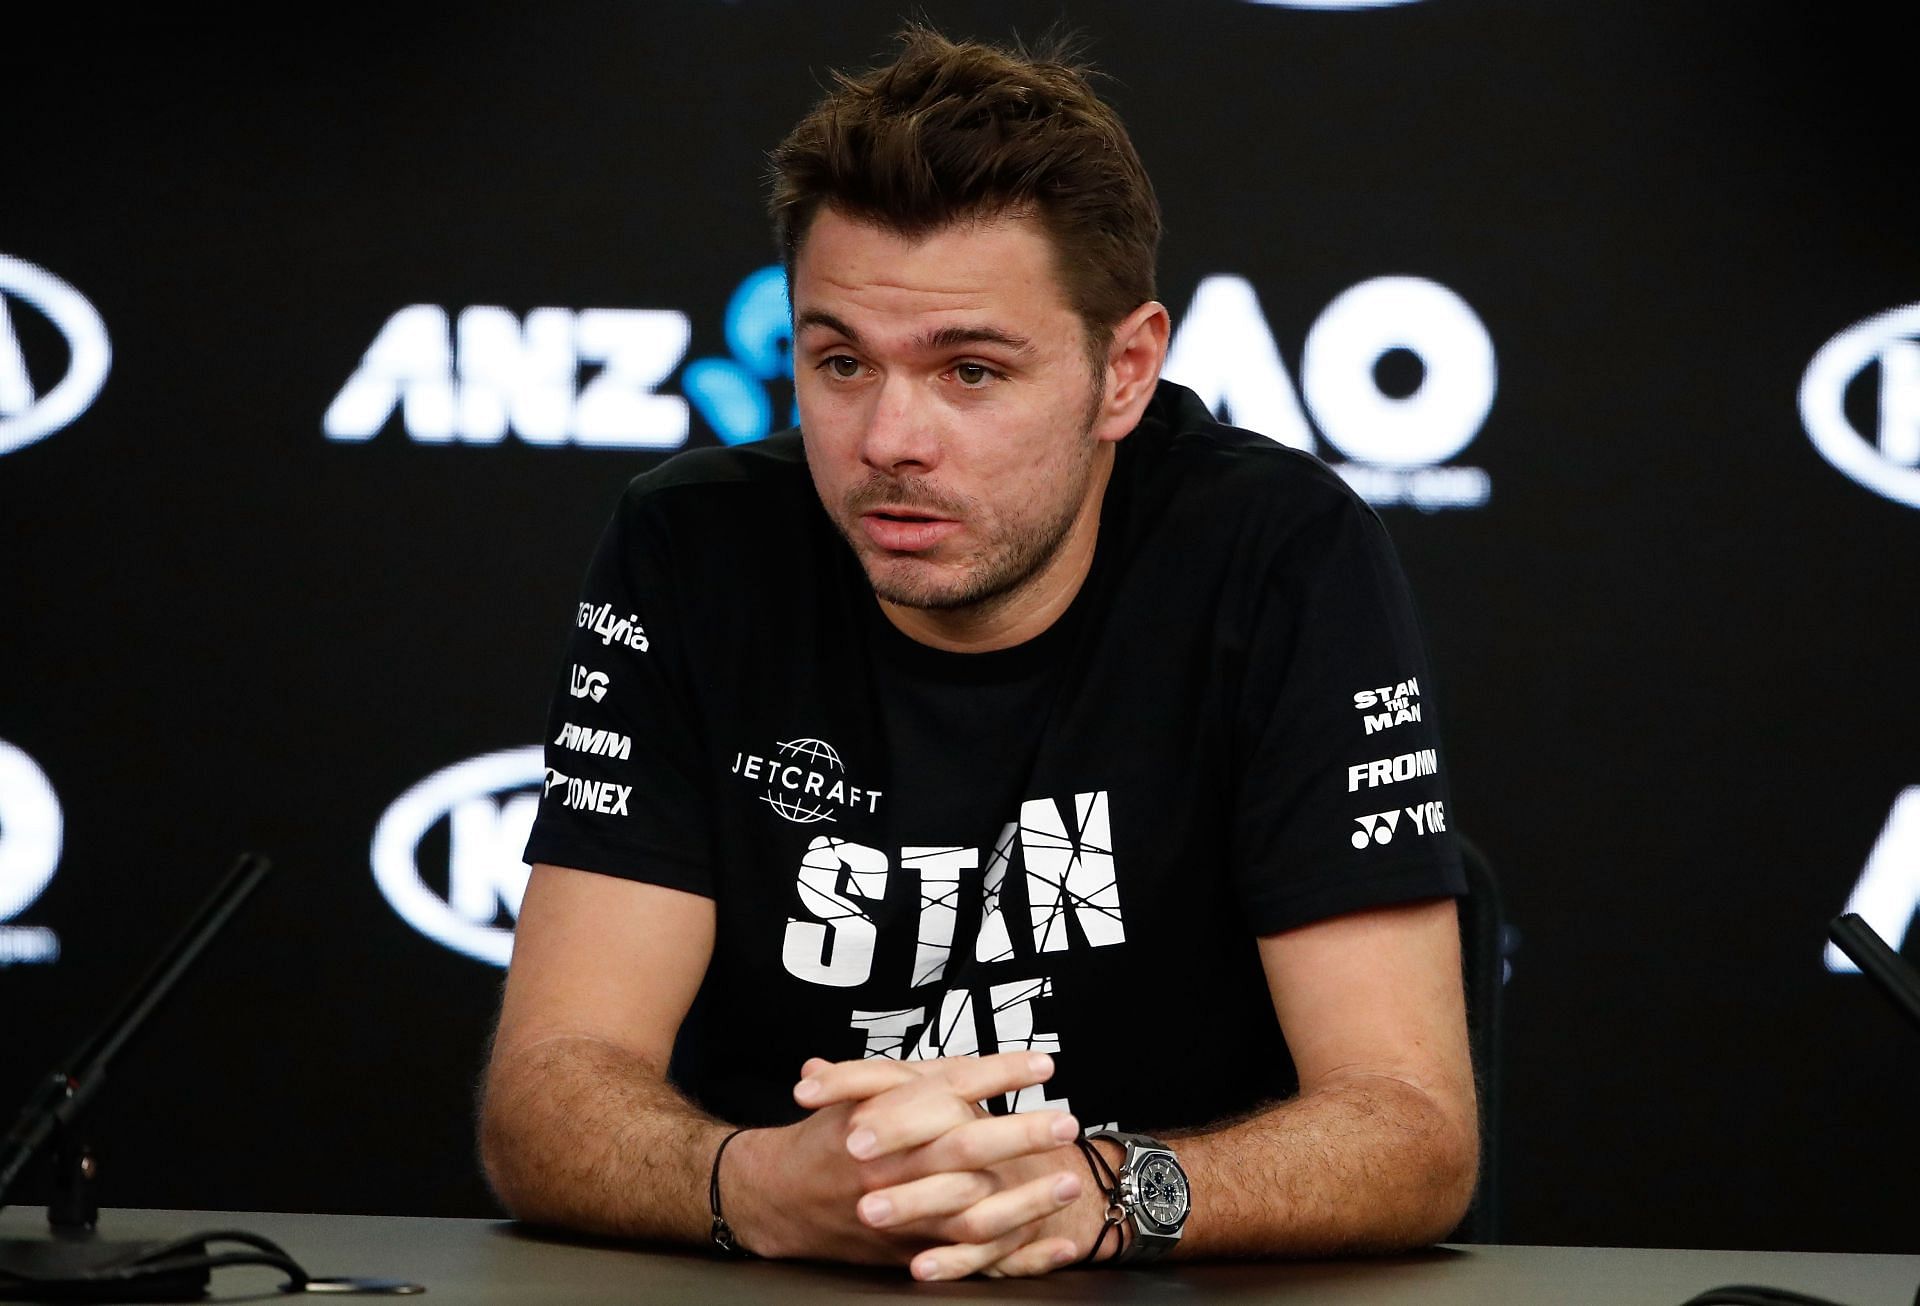 Stan Wawrinka pictured during a press conference at the 2018 Australian Open.